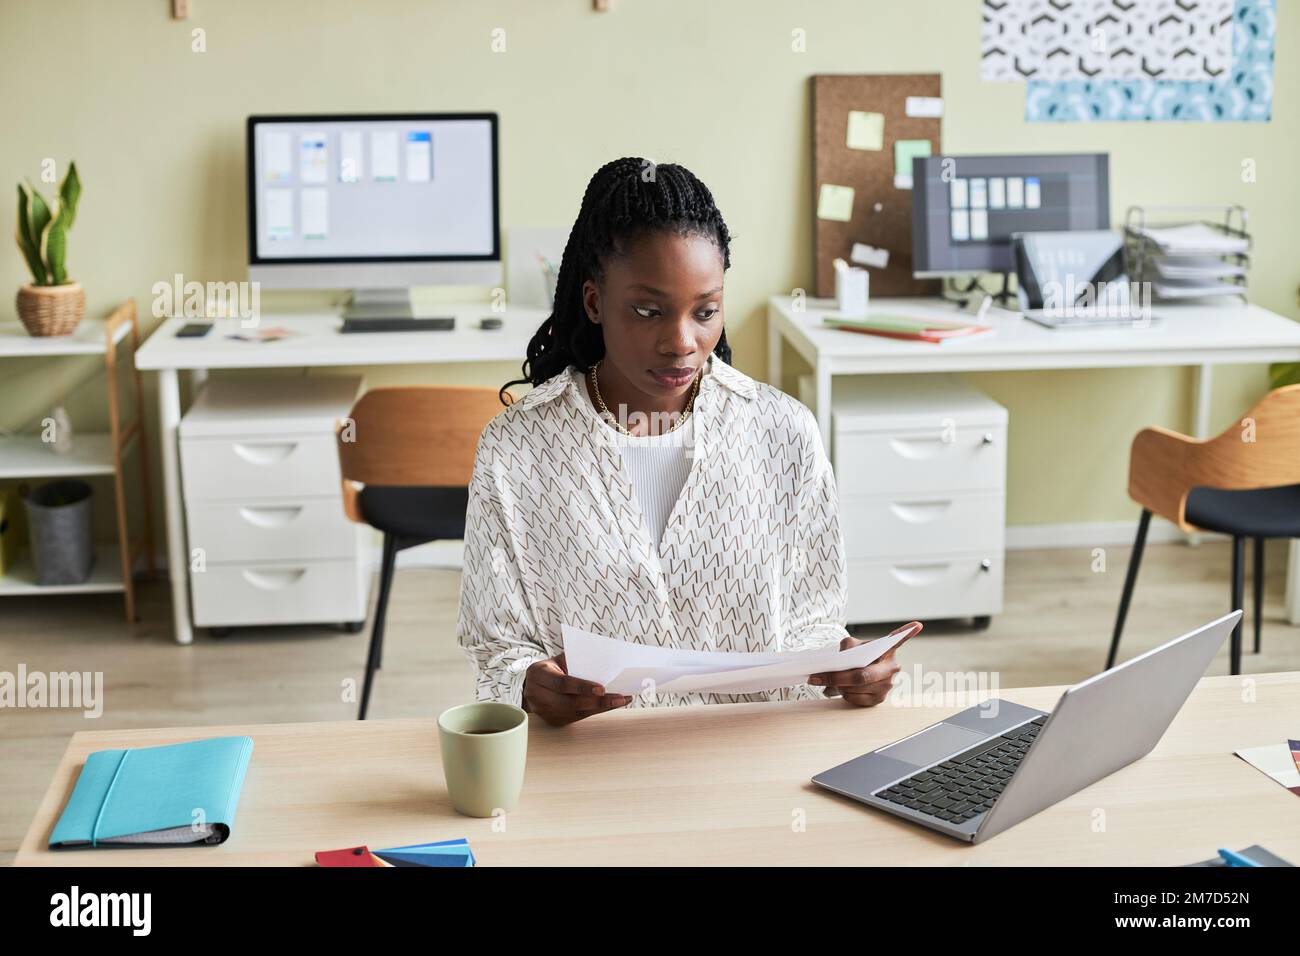 Portrait of black young woman using laptop while working at desk in cozy office setting, copy space Stock Photo